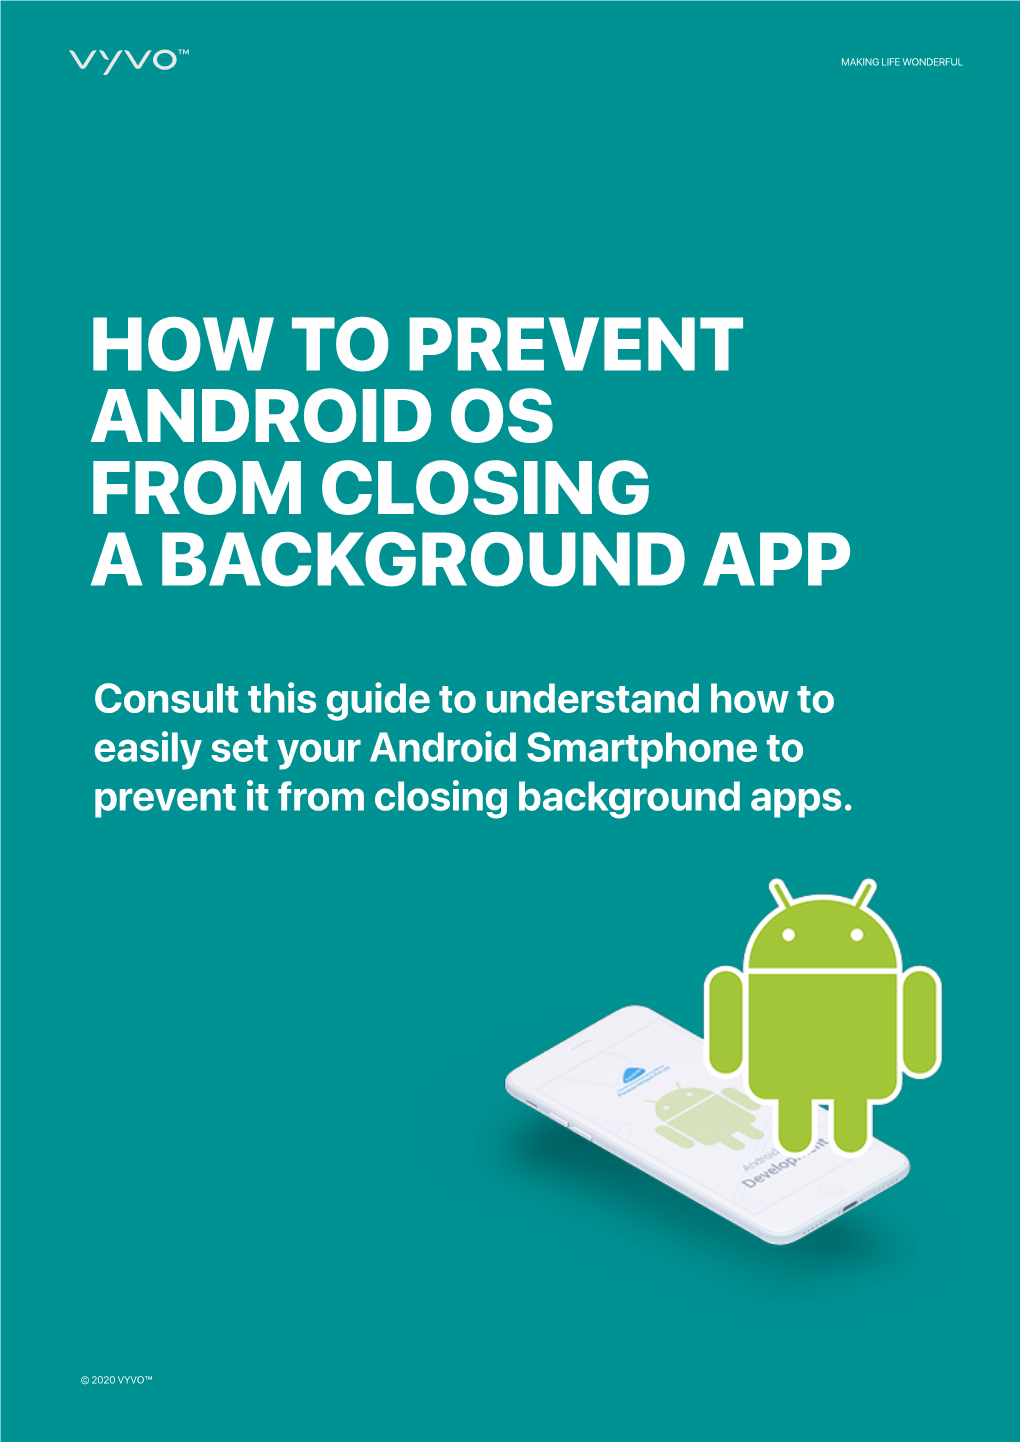 How to Prevent Android Os from Closing a Background App